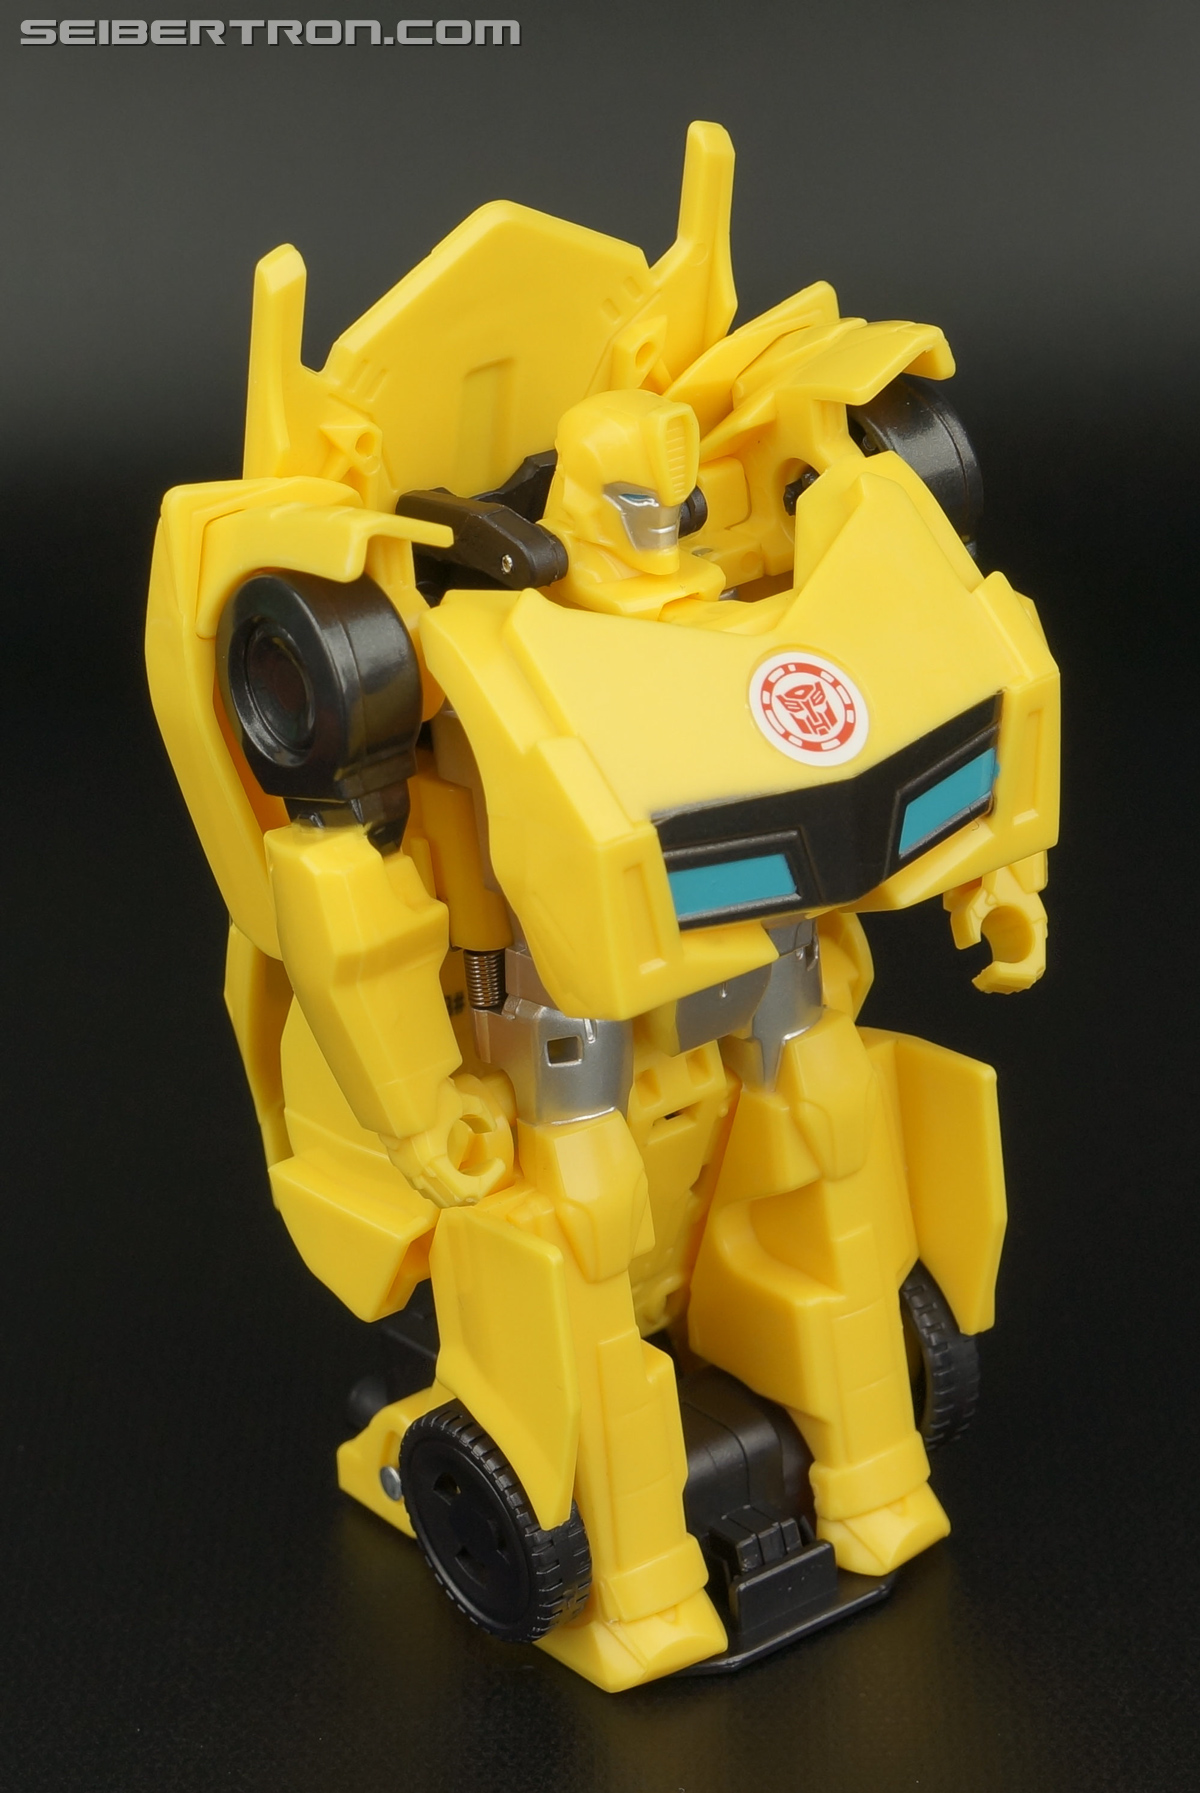 Transformers: Robots In Disguise Bumblebee (Image #43 of 75)